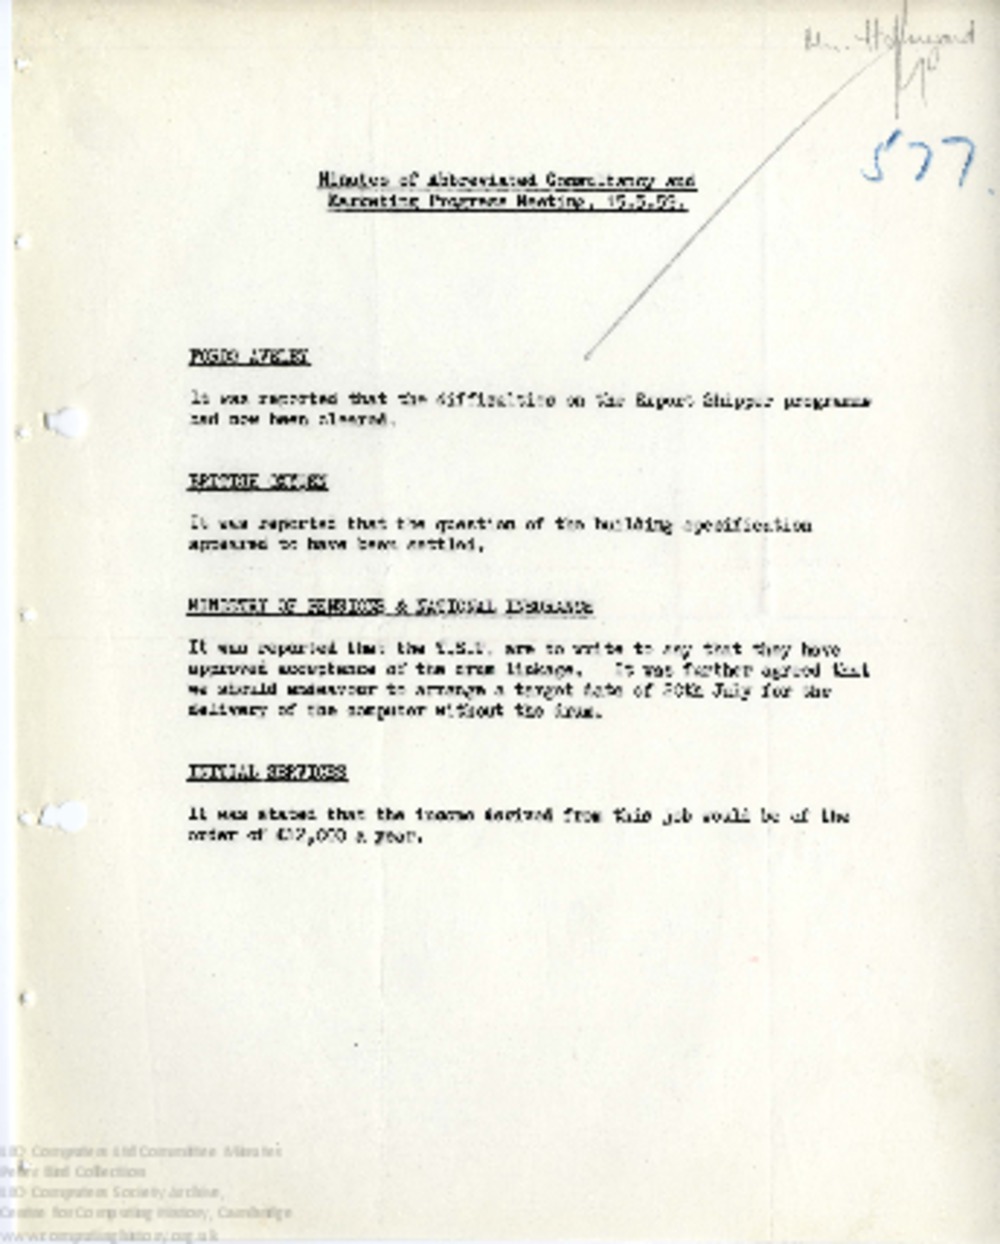 Article: 64476 Abbreviated Consultancy and Marketing Progress Report and Minutes, 15th May 1959